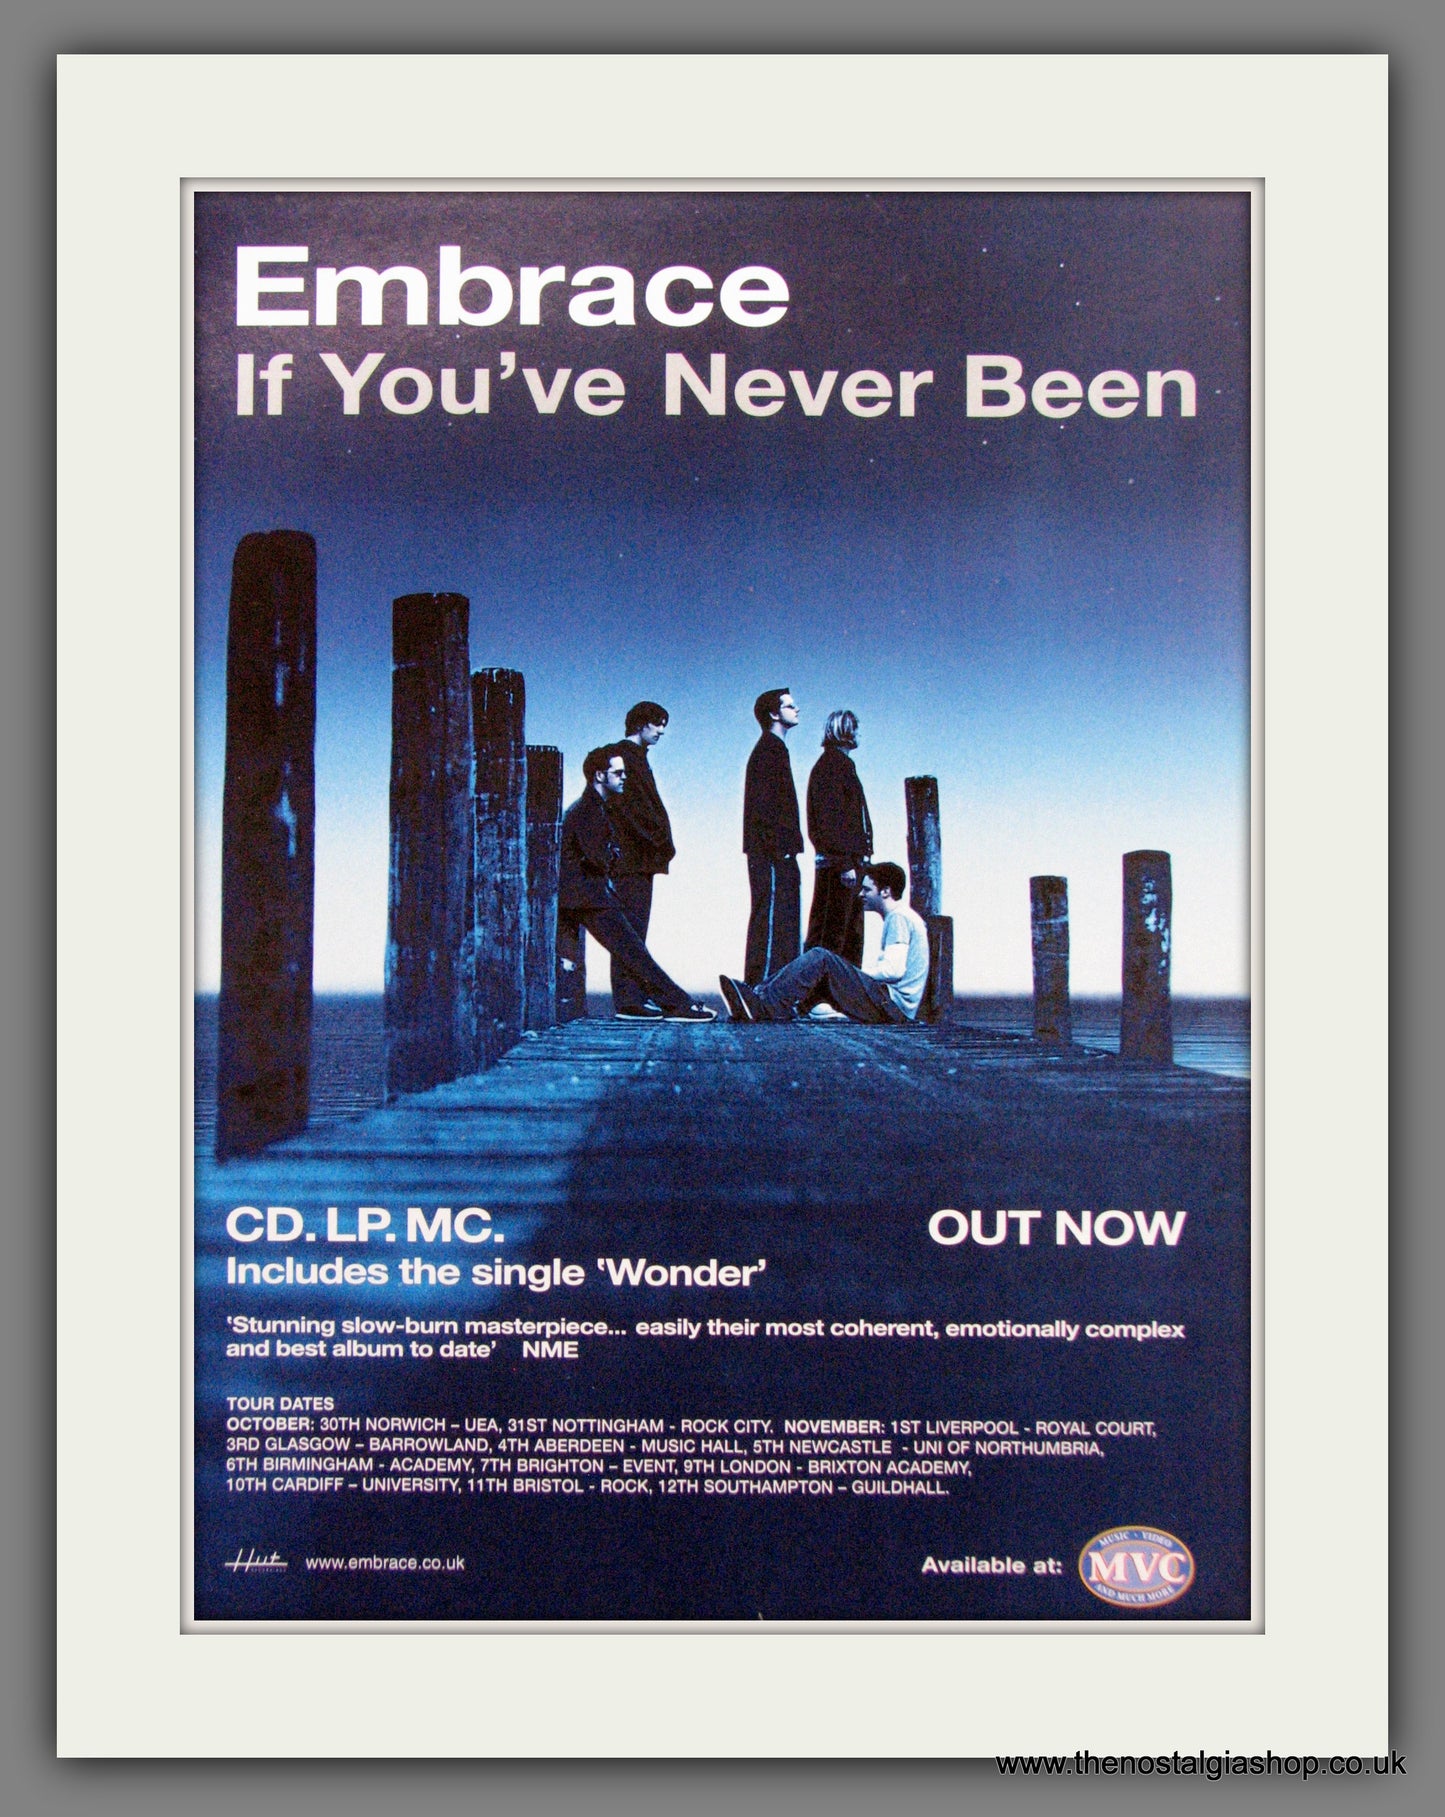 Embrace - If You've Never Been. Original Advert 2001 (ref AD50208)